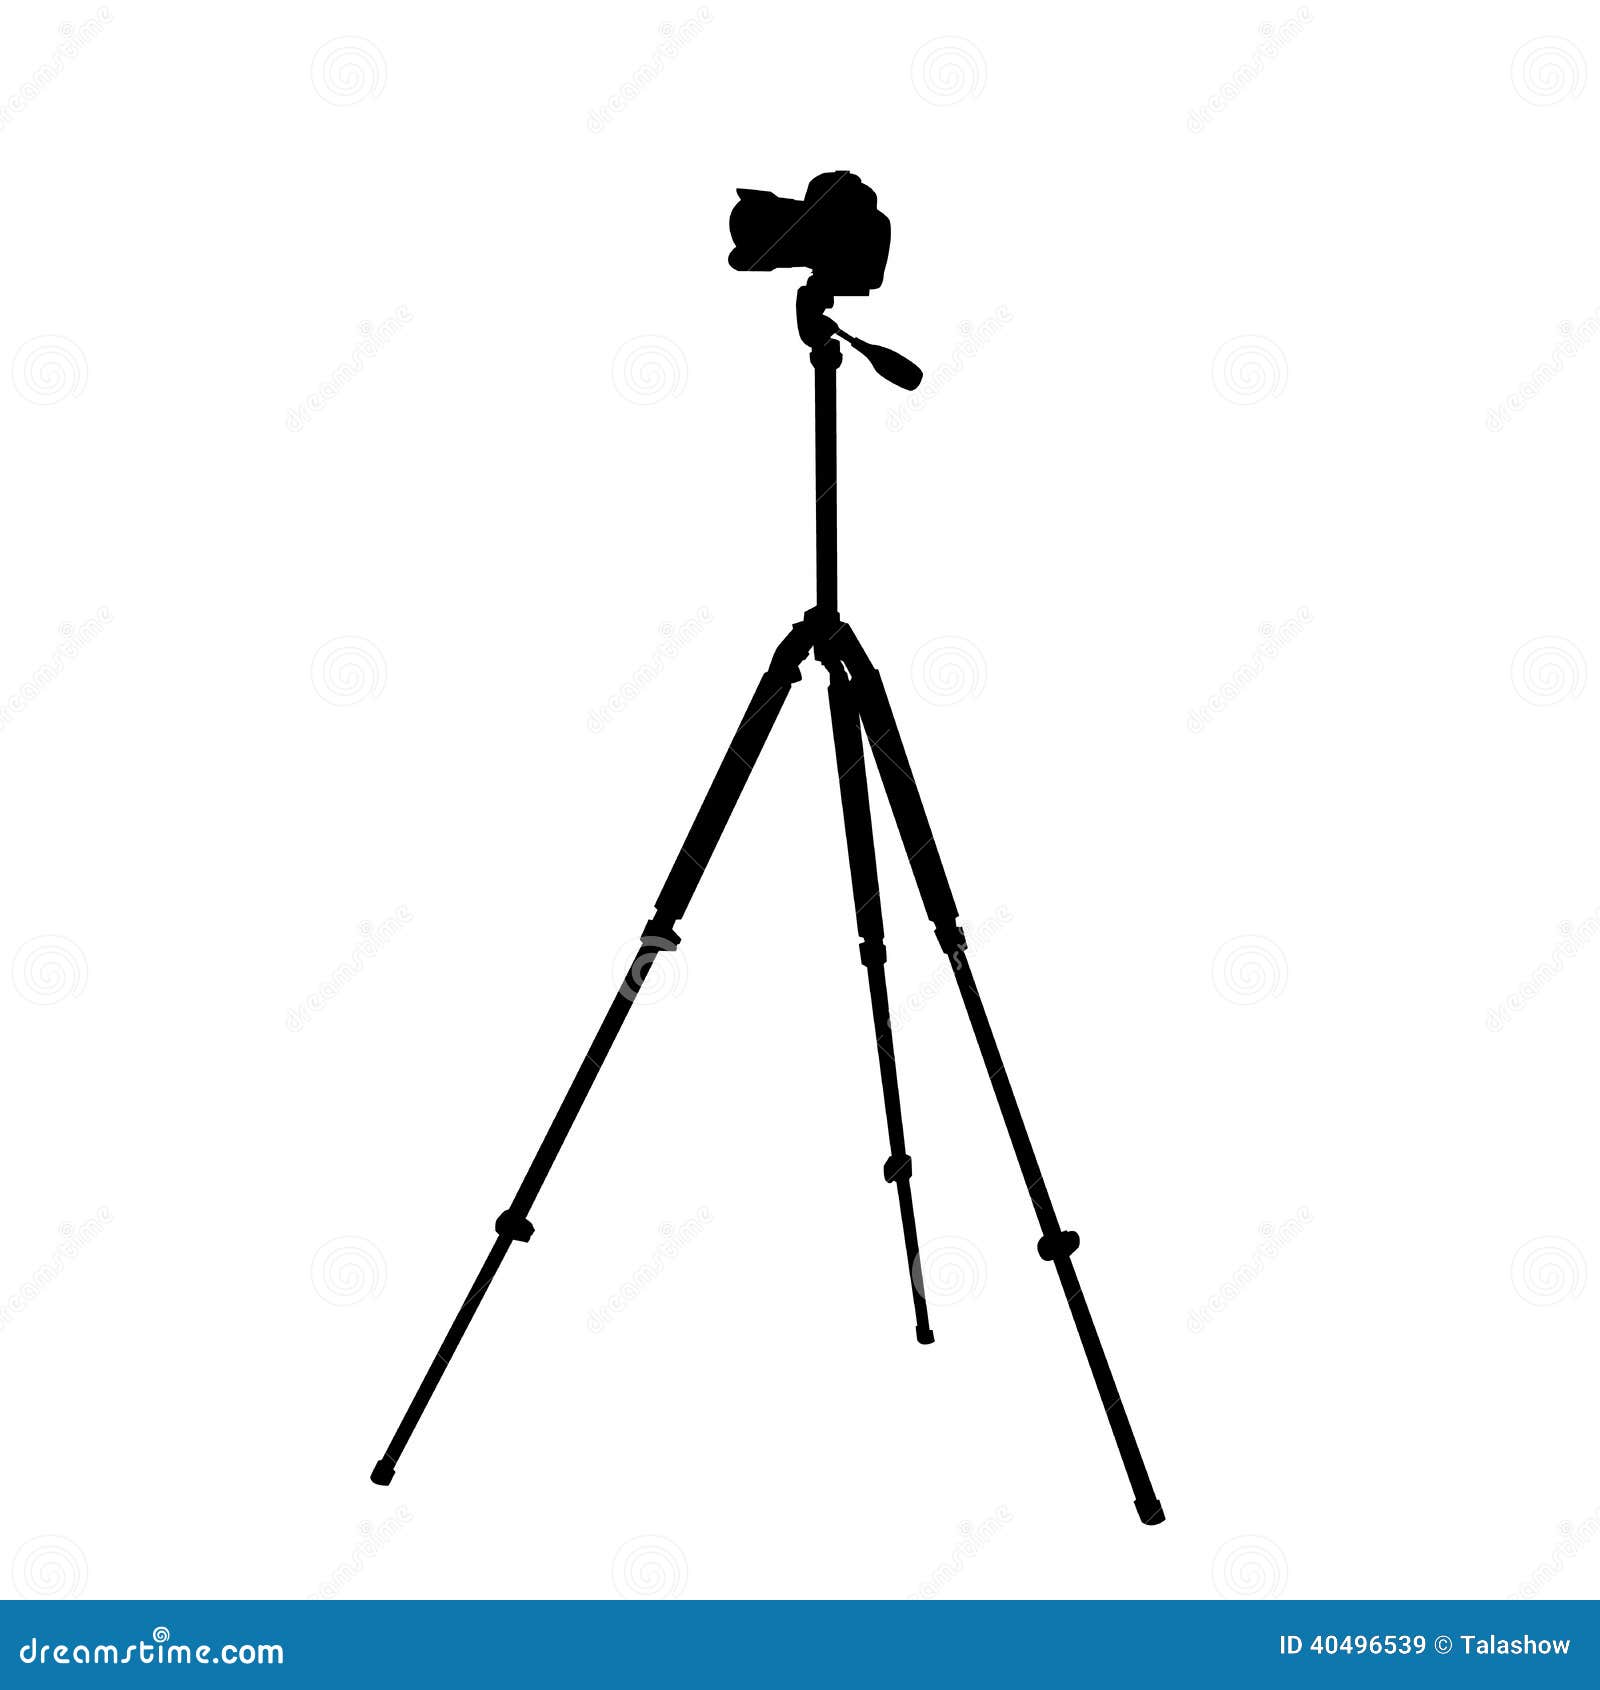 camera stand clipart - photo #7